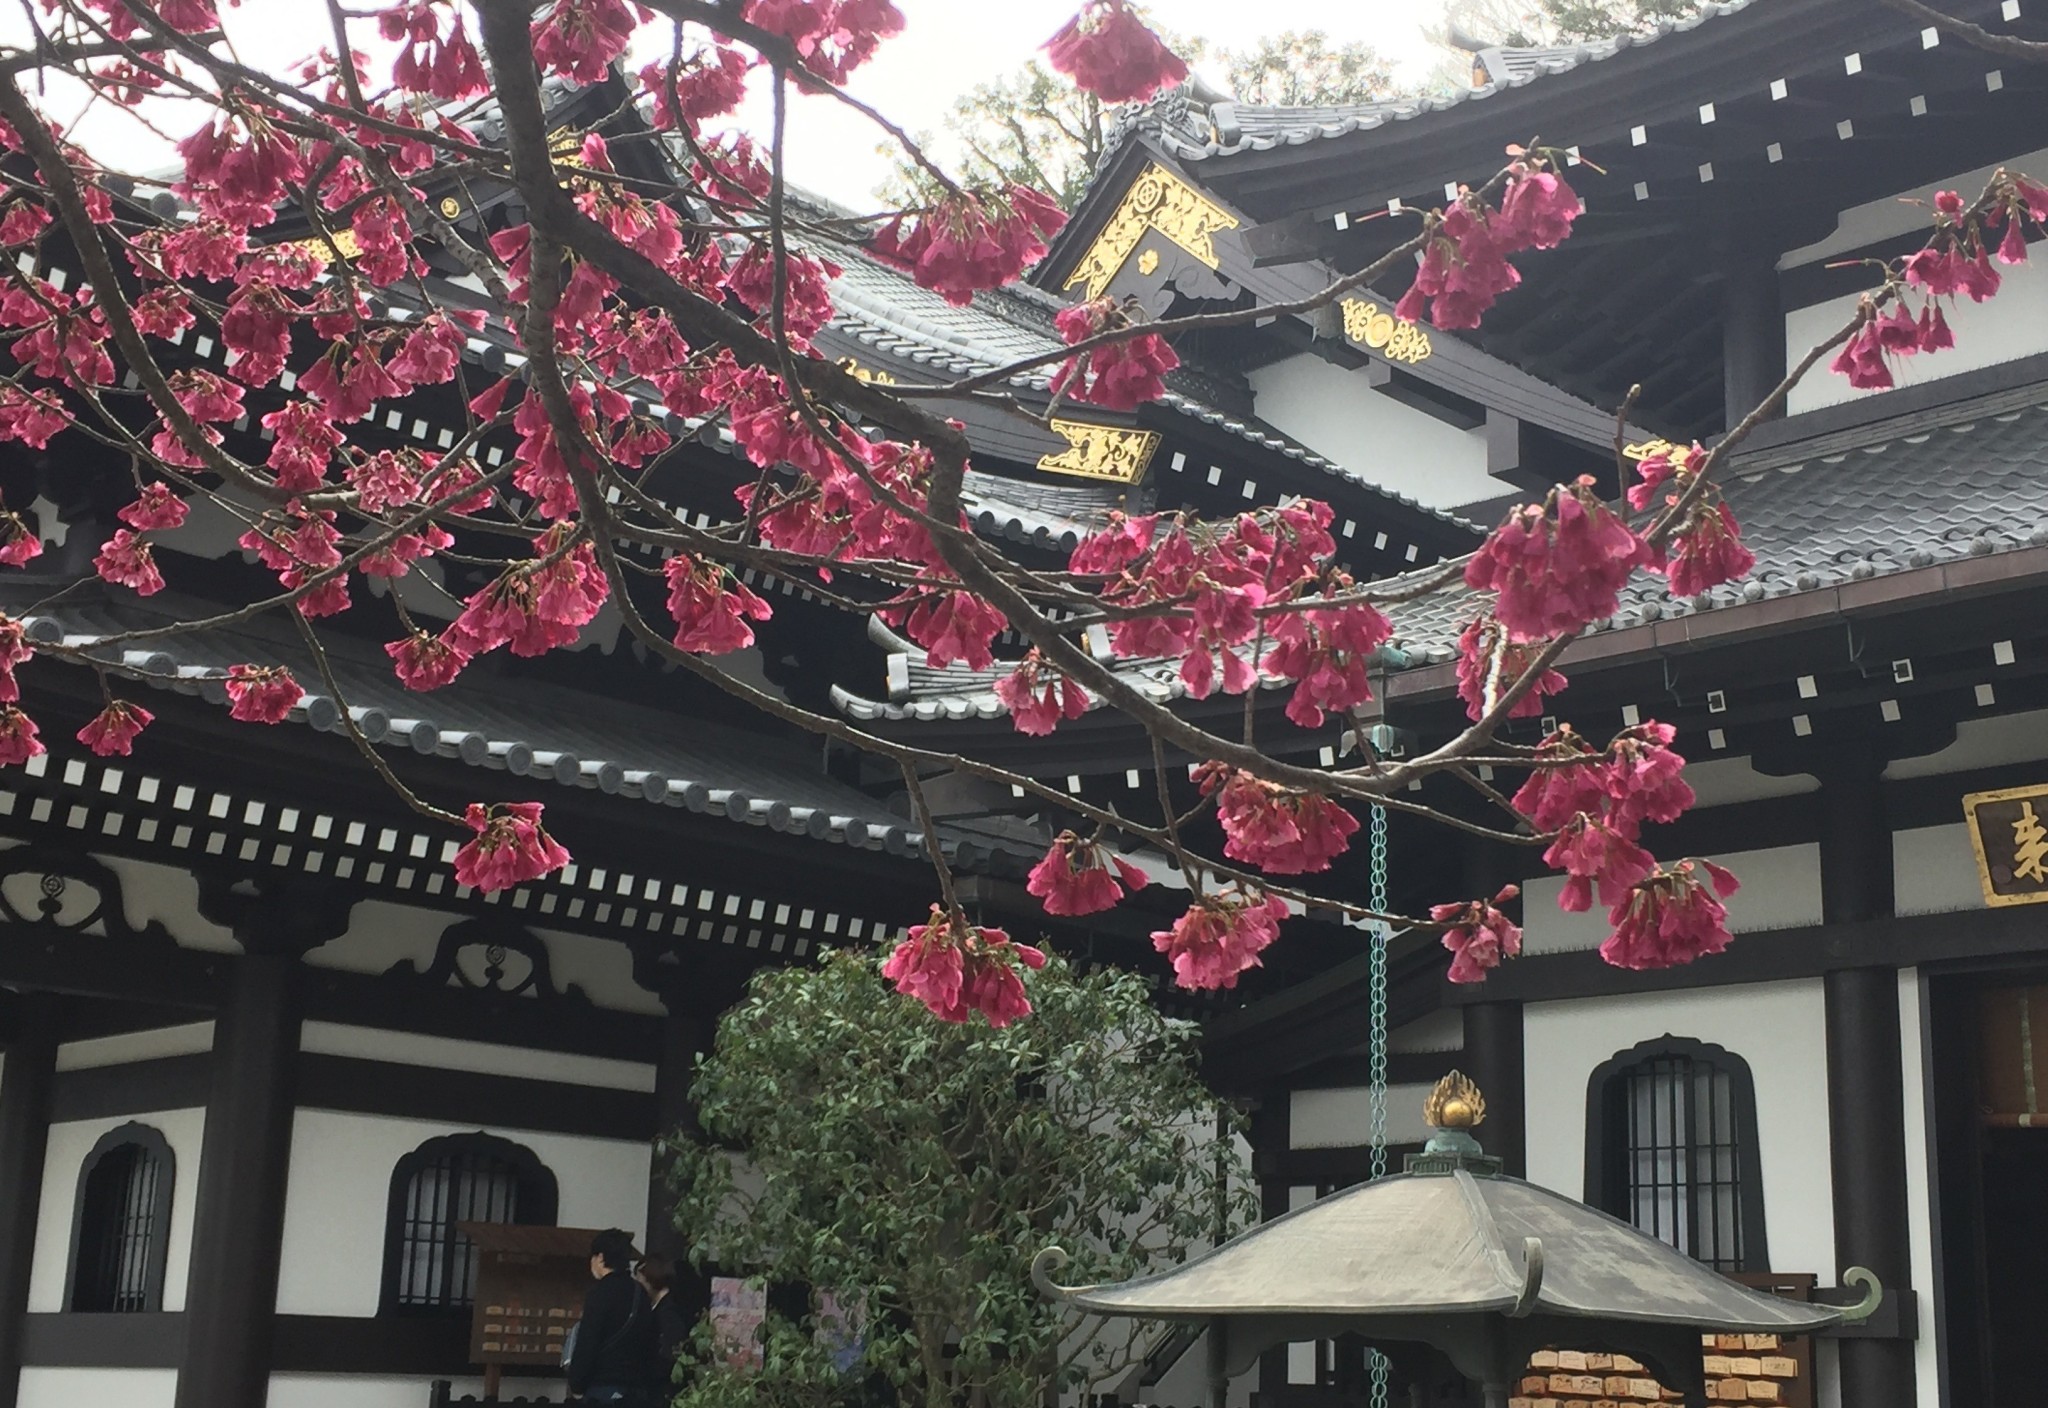 Why is Hasedera Temple a Kamakura cultural delight?